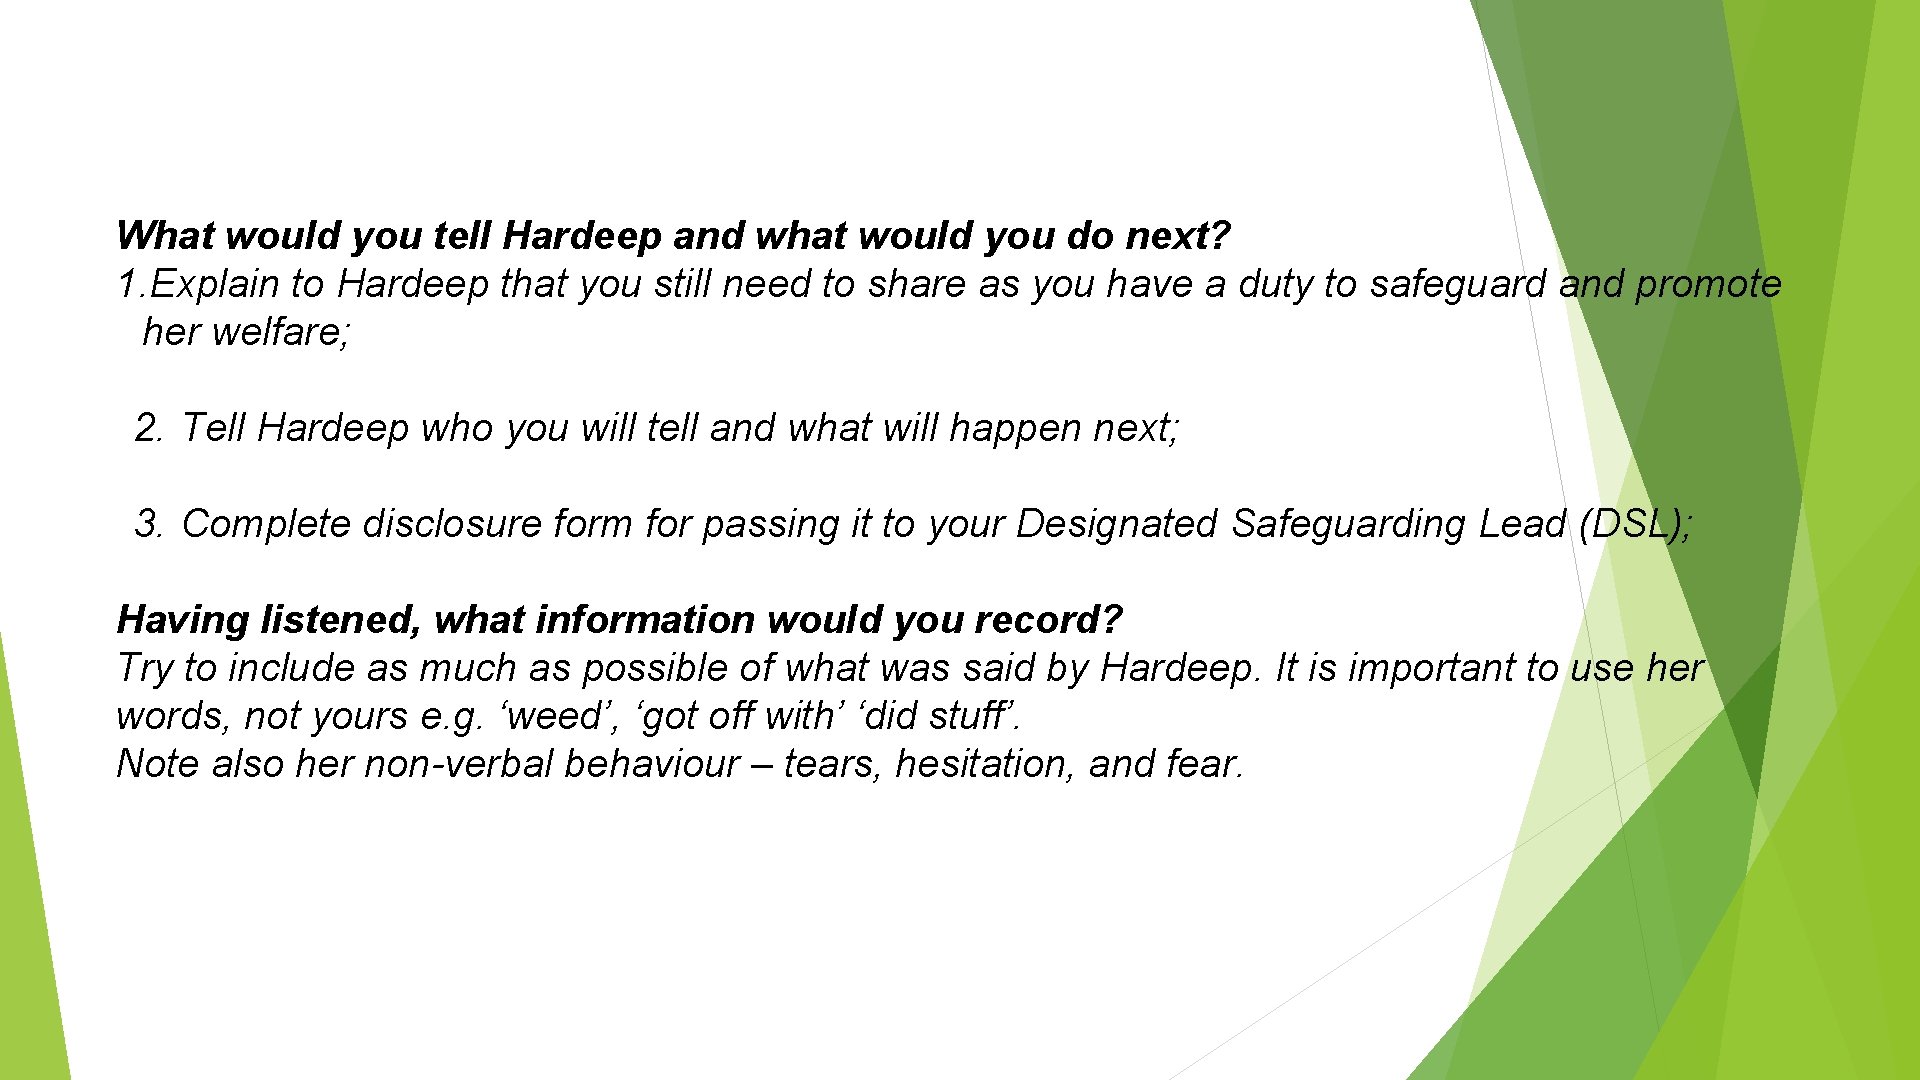 What would you tell Hardeep and what would you do next? 1. Explain to